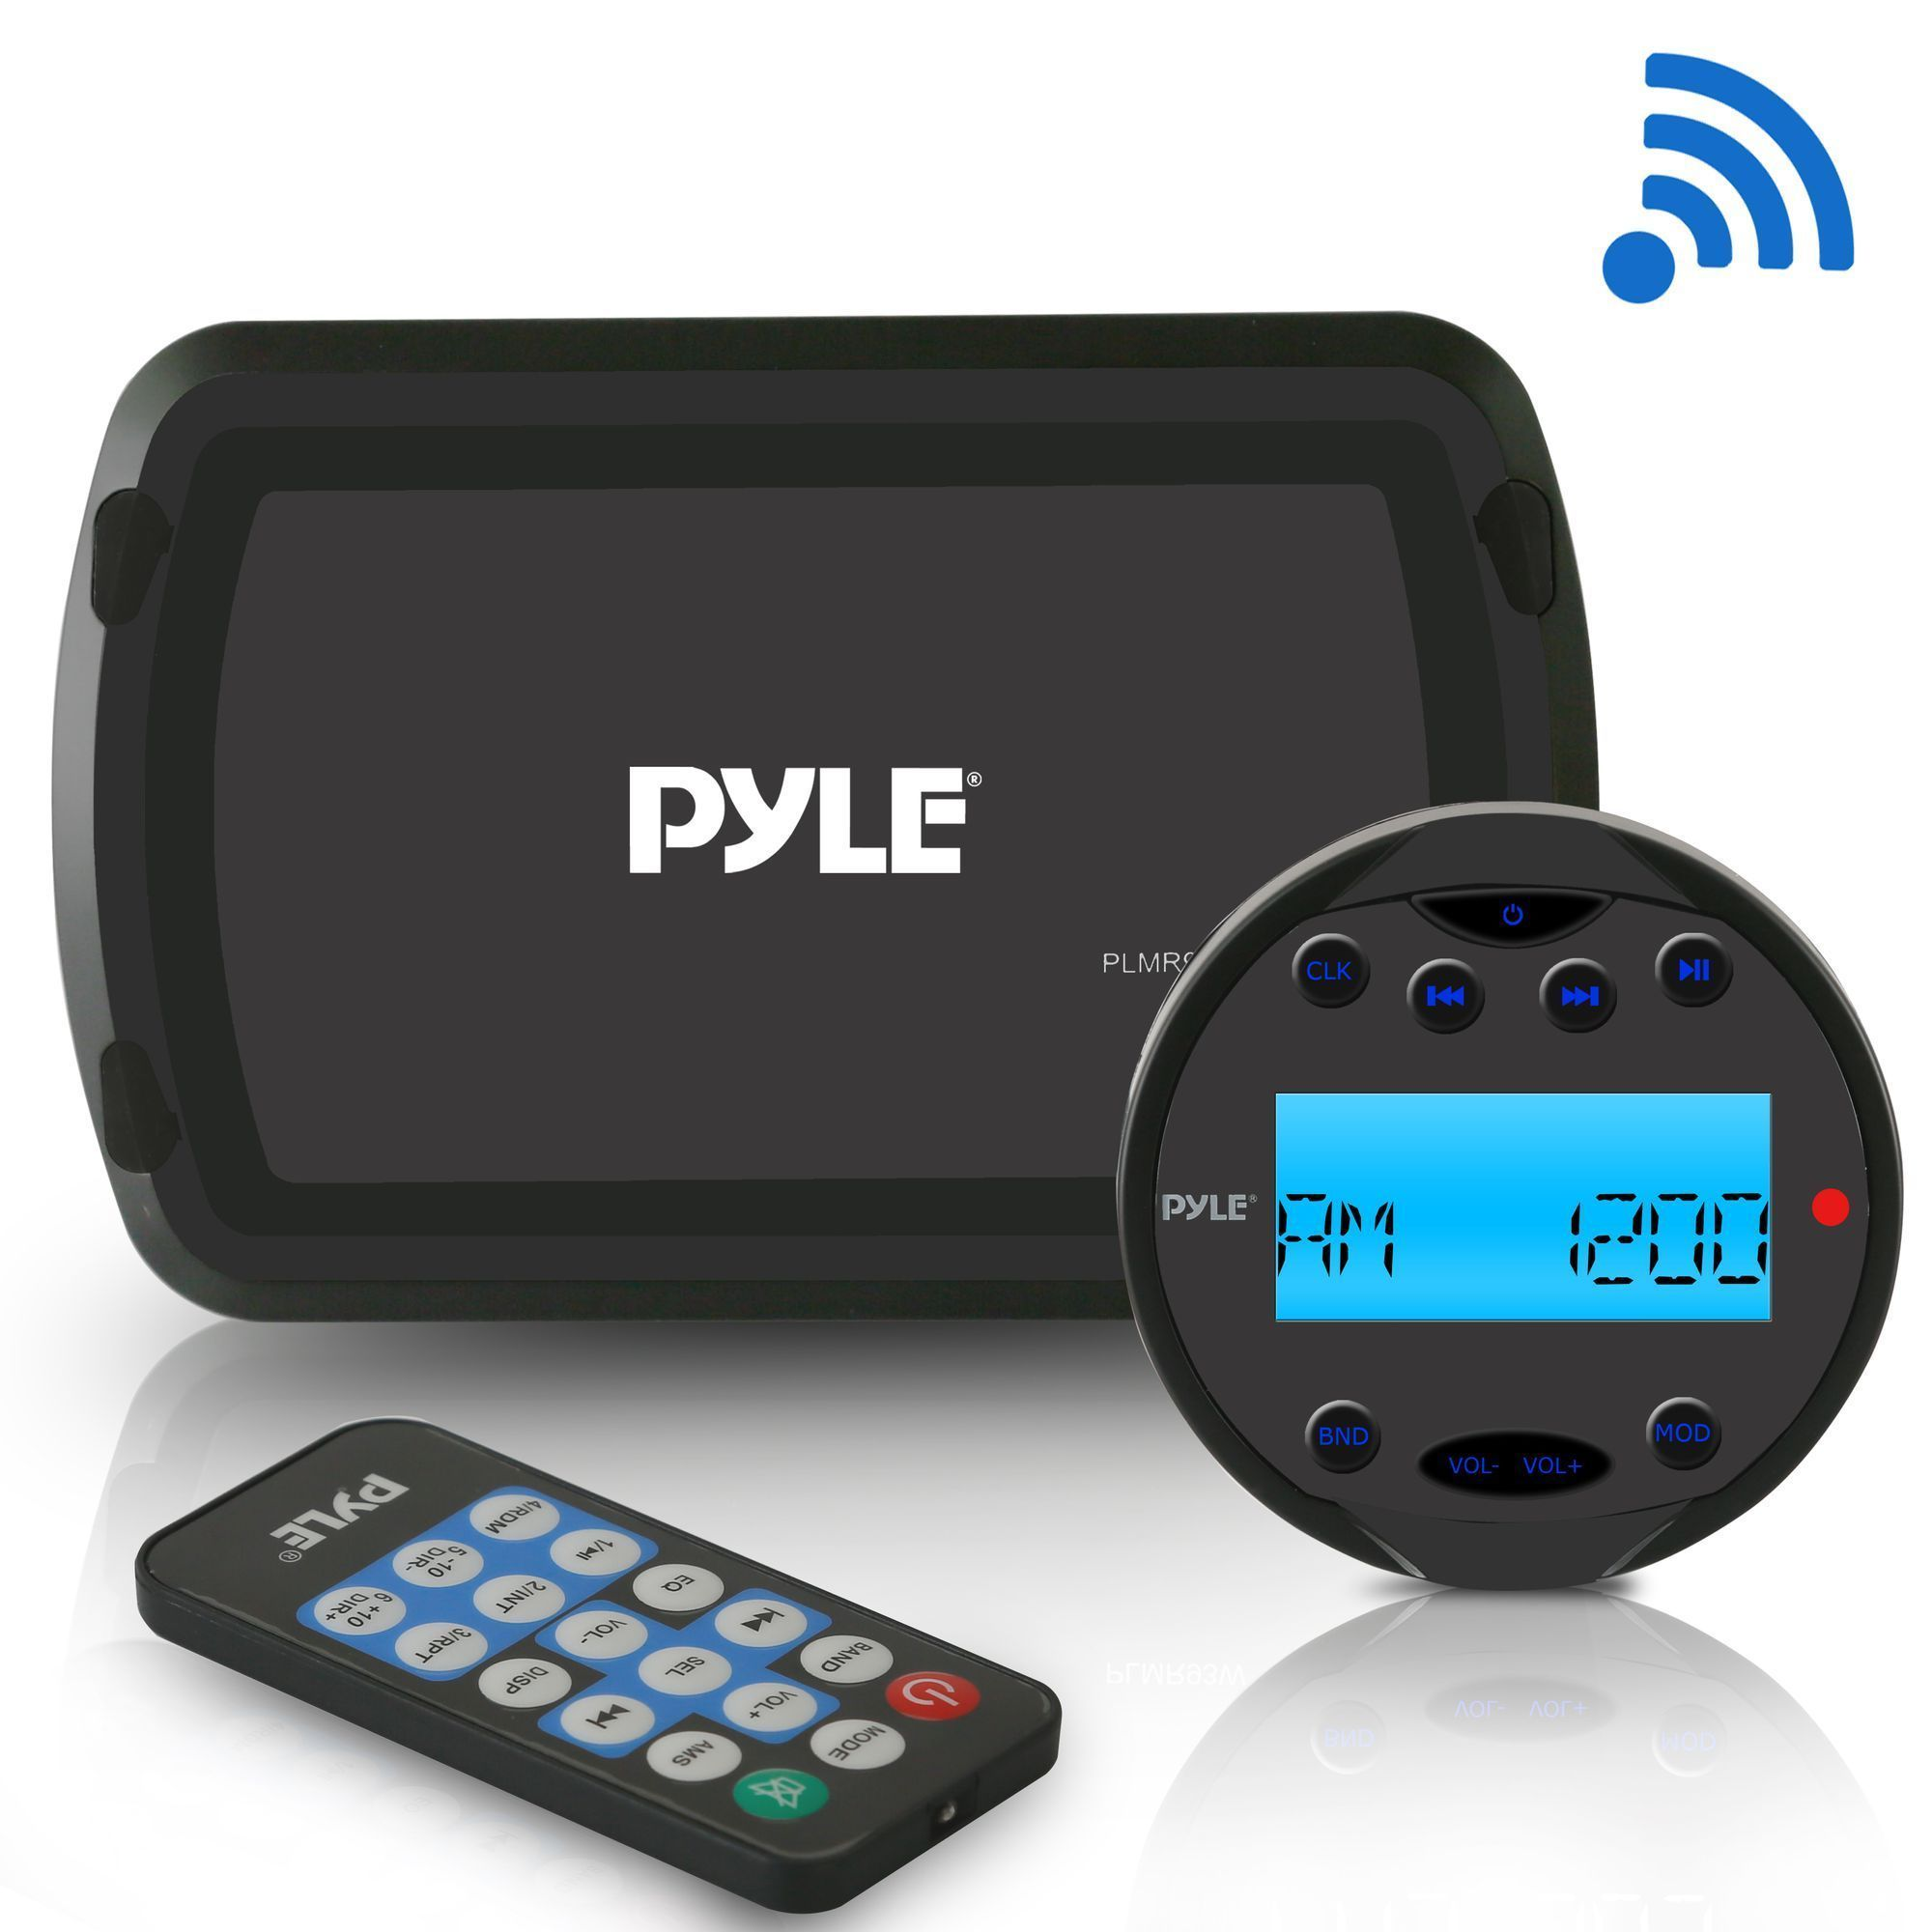 Pyle Bluetooth Stereo Boat Receiver System, Wired Control Unit, Waterproof, AM/FM Radio, (PLMR93W)